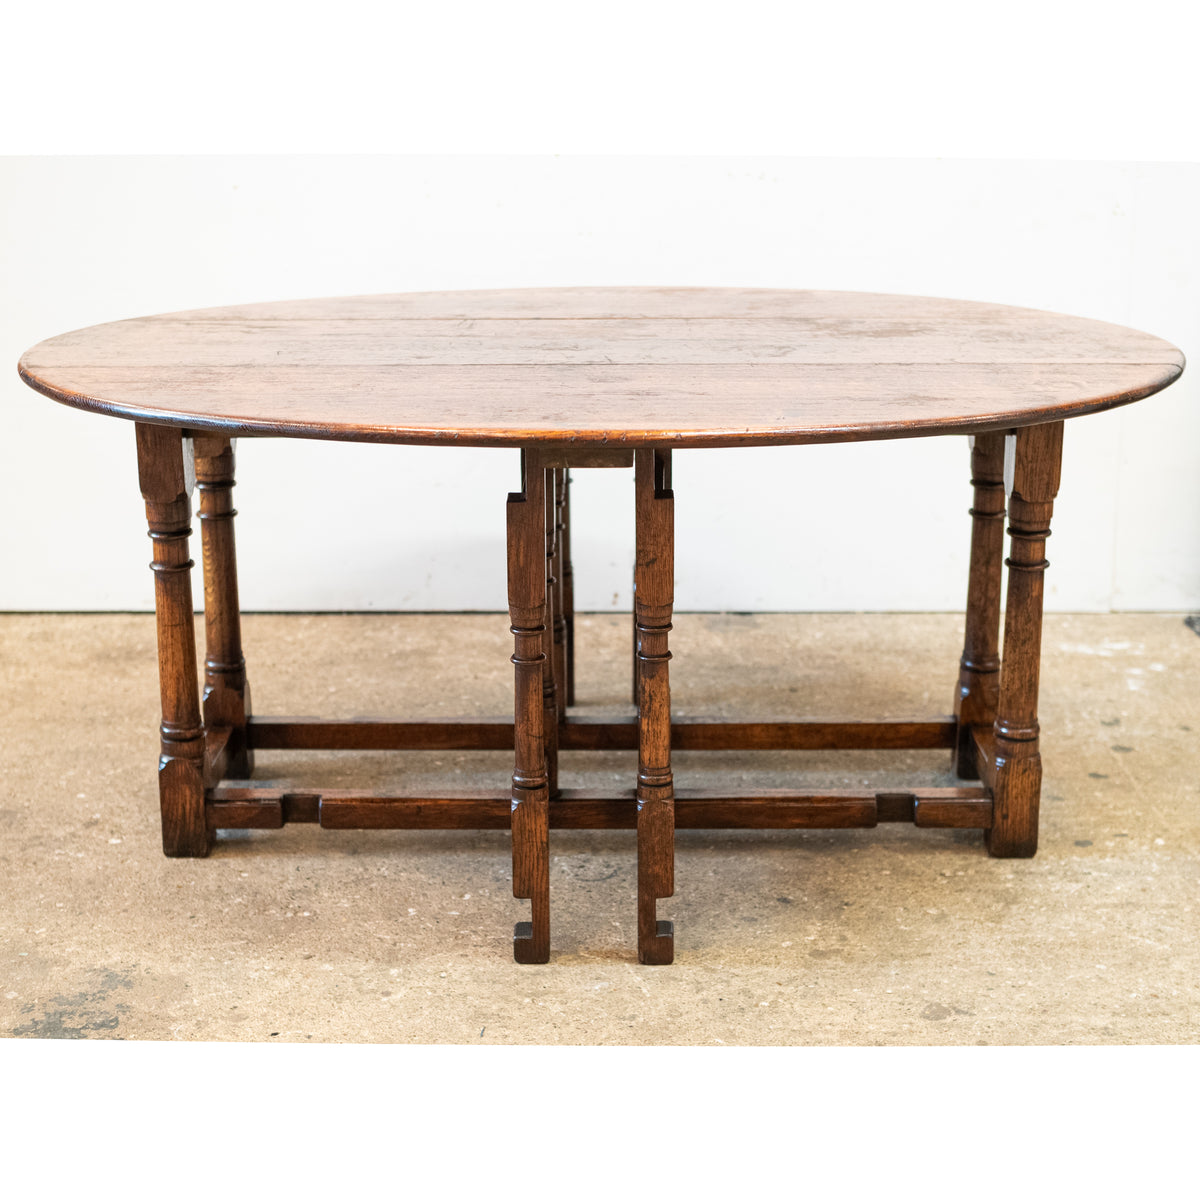 Large Reclaimed Oak Gateleg Drop Leaf Table | Wake Table | The Architectural Forum